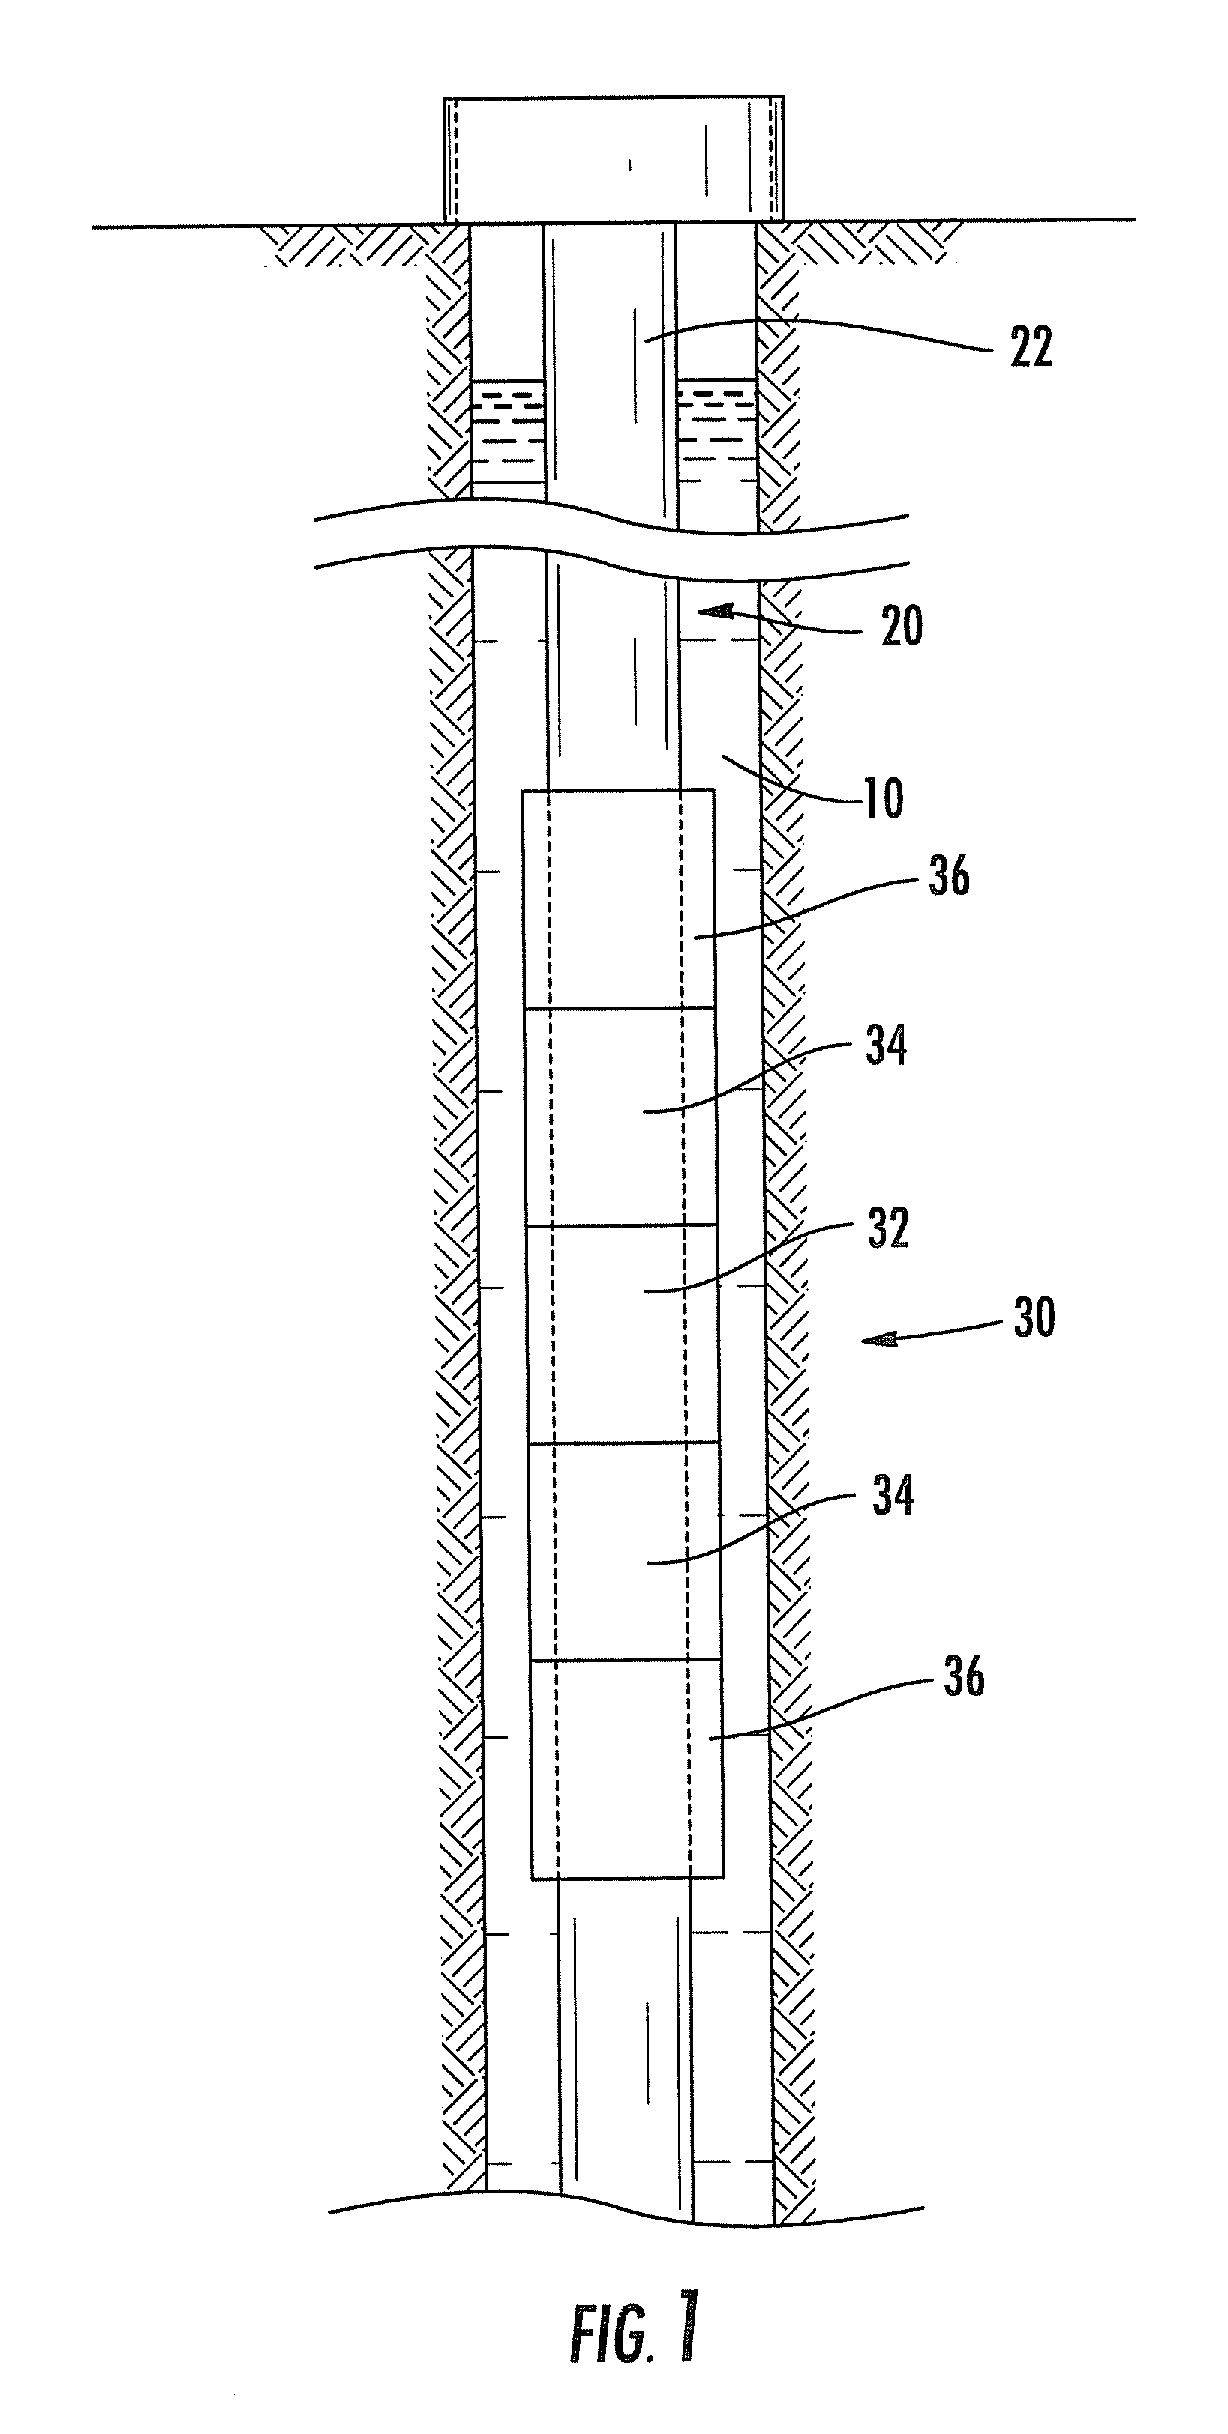 Downwell system with differentially swellable packer